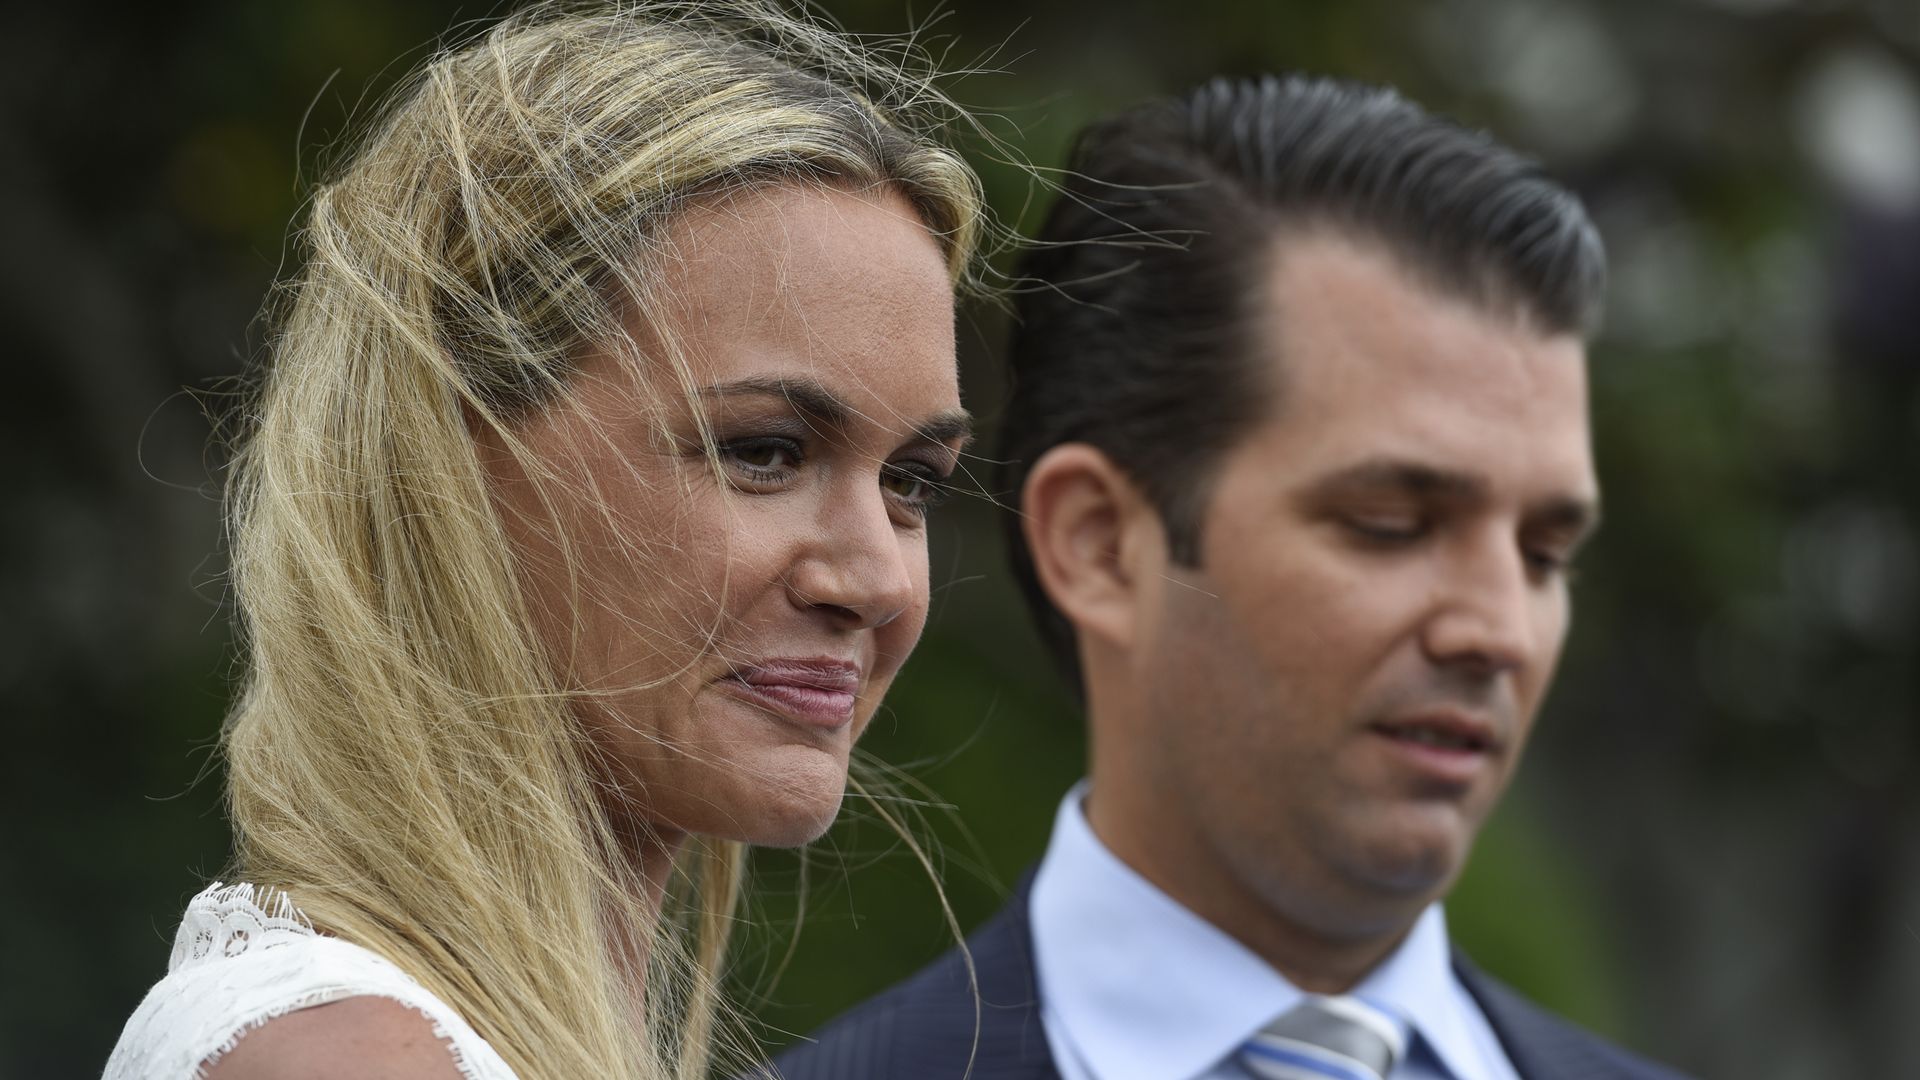 Trump jr. and wife